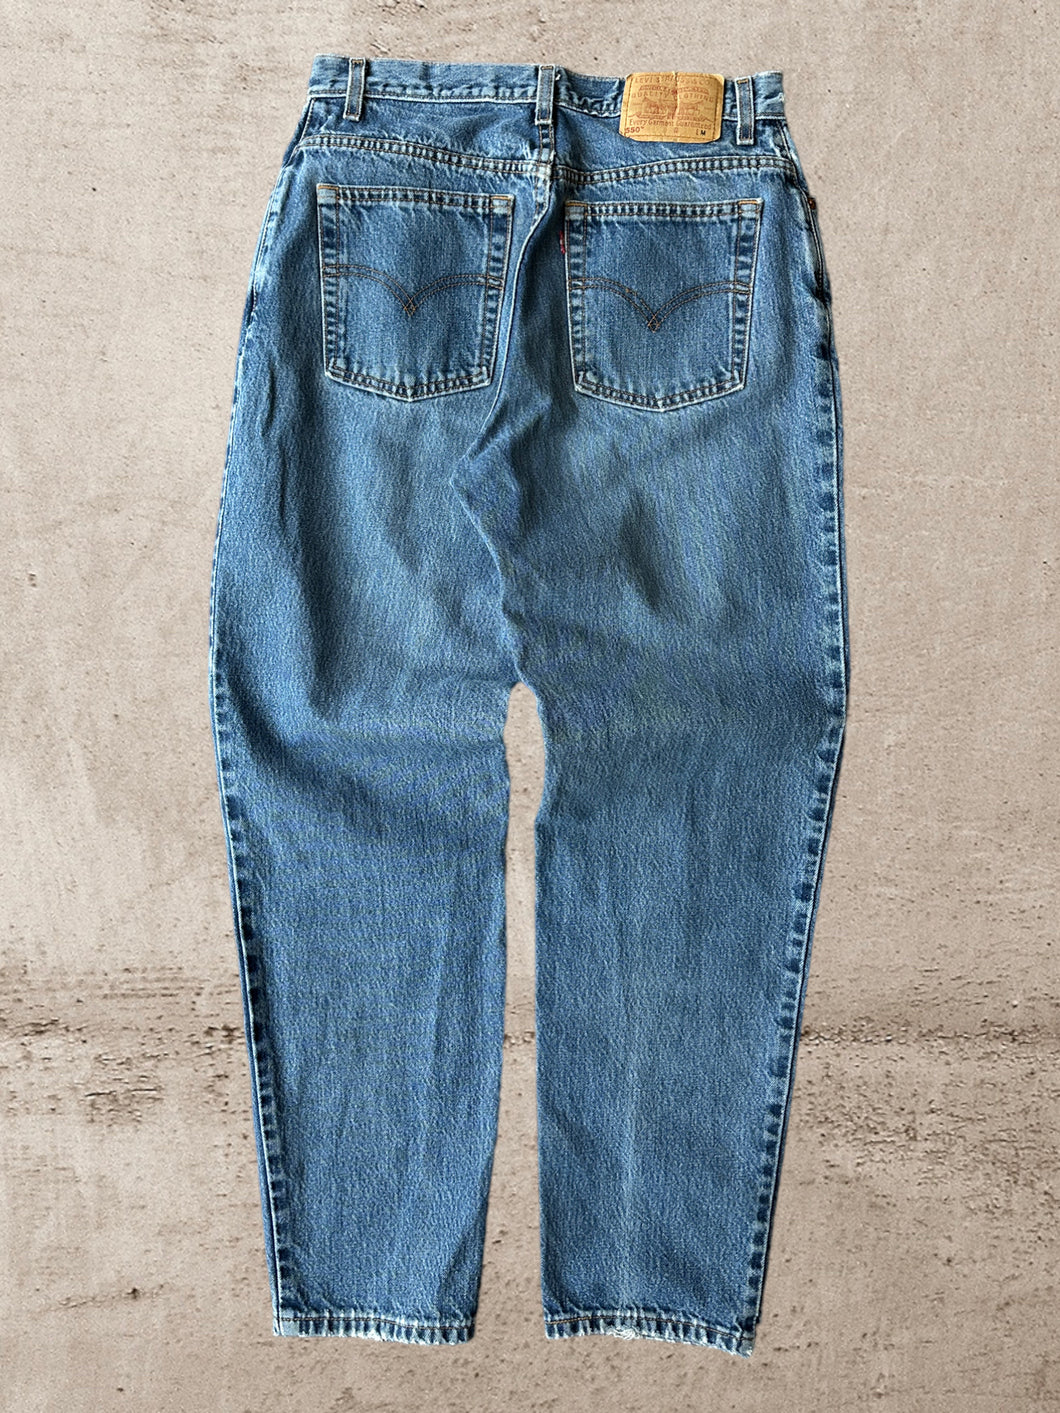 90s Levi 550 Relaxed Fit Jeans - 29x29